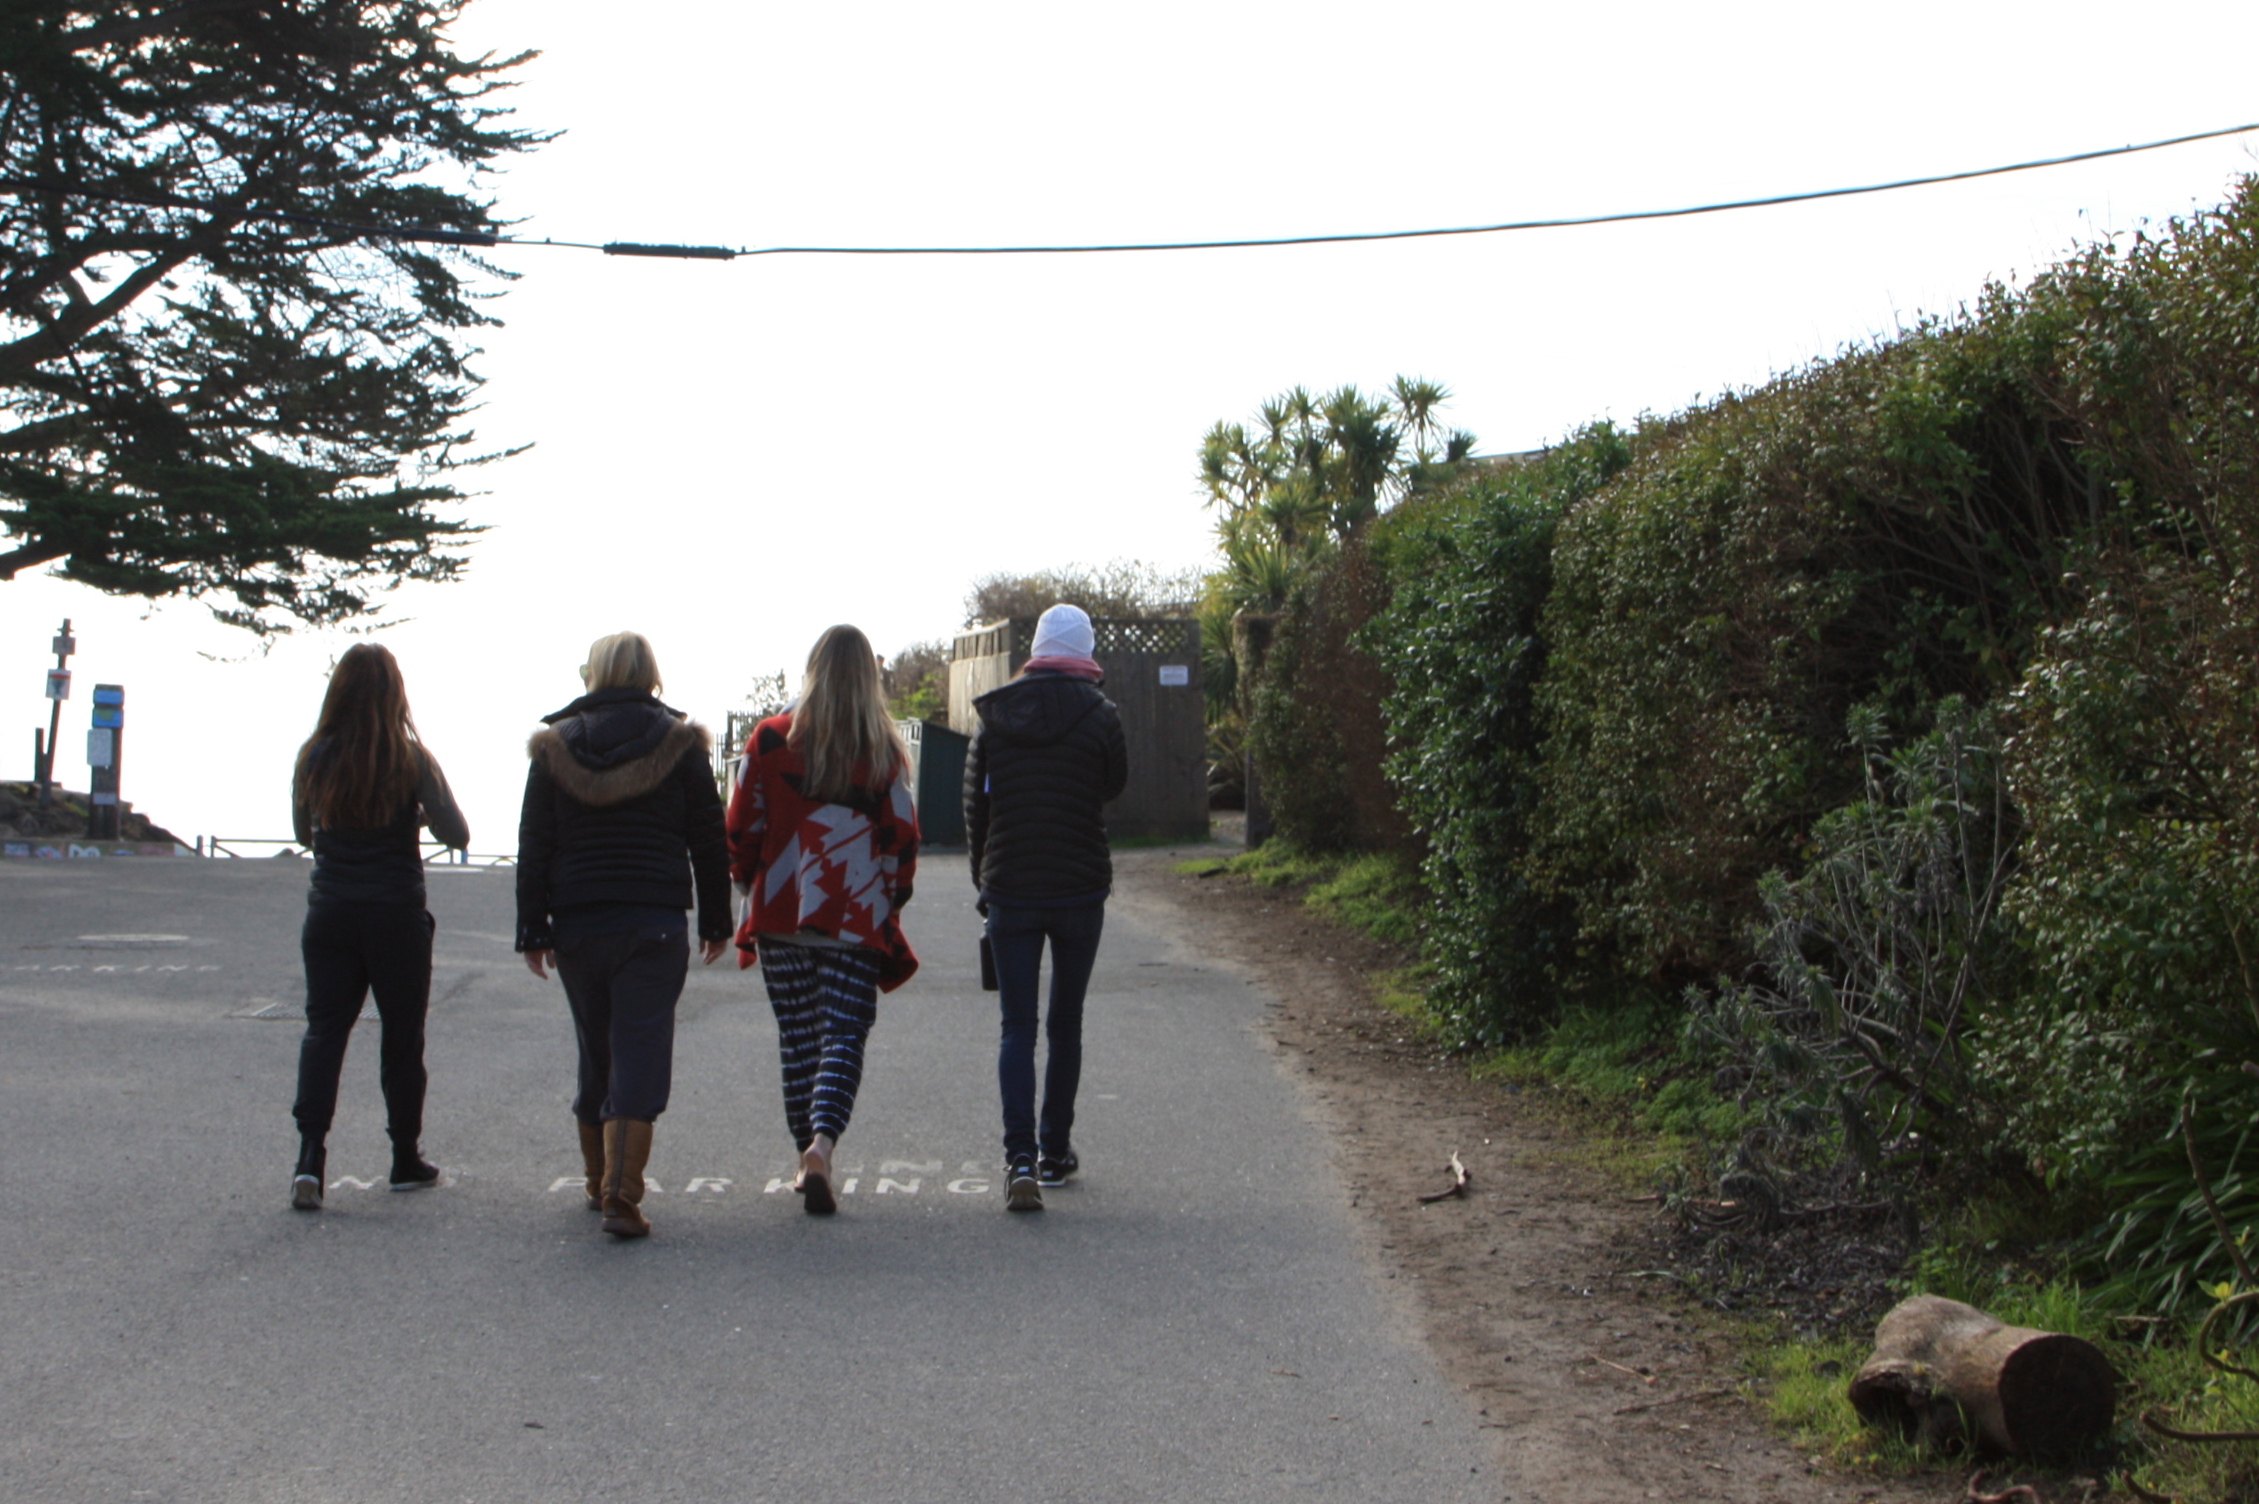 Group going to check conditions in Bolinas.